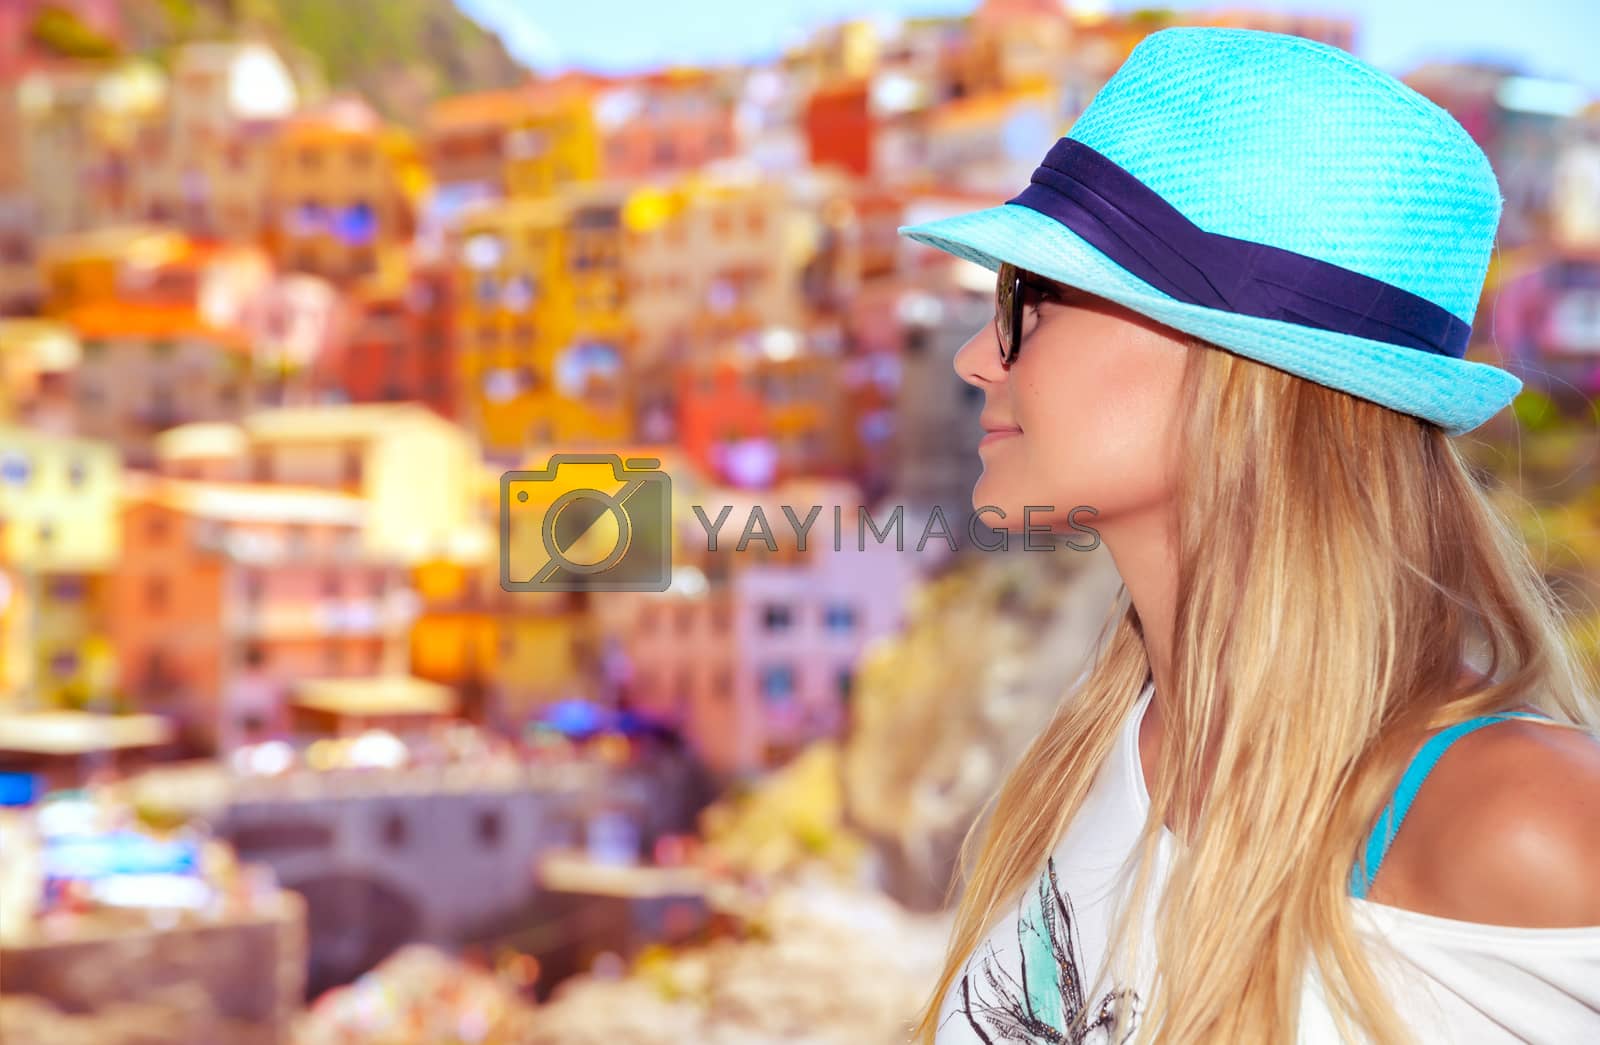 Royalty free image of Tourist woman enjoying  Italy by Anna_Omelchenko